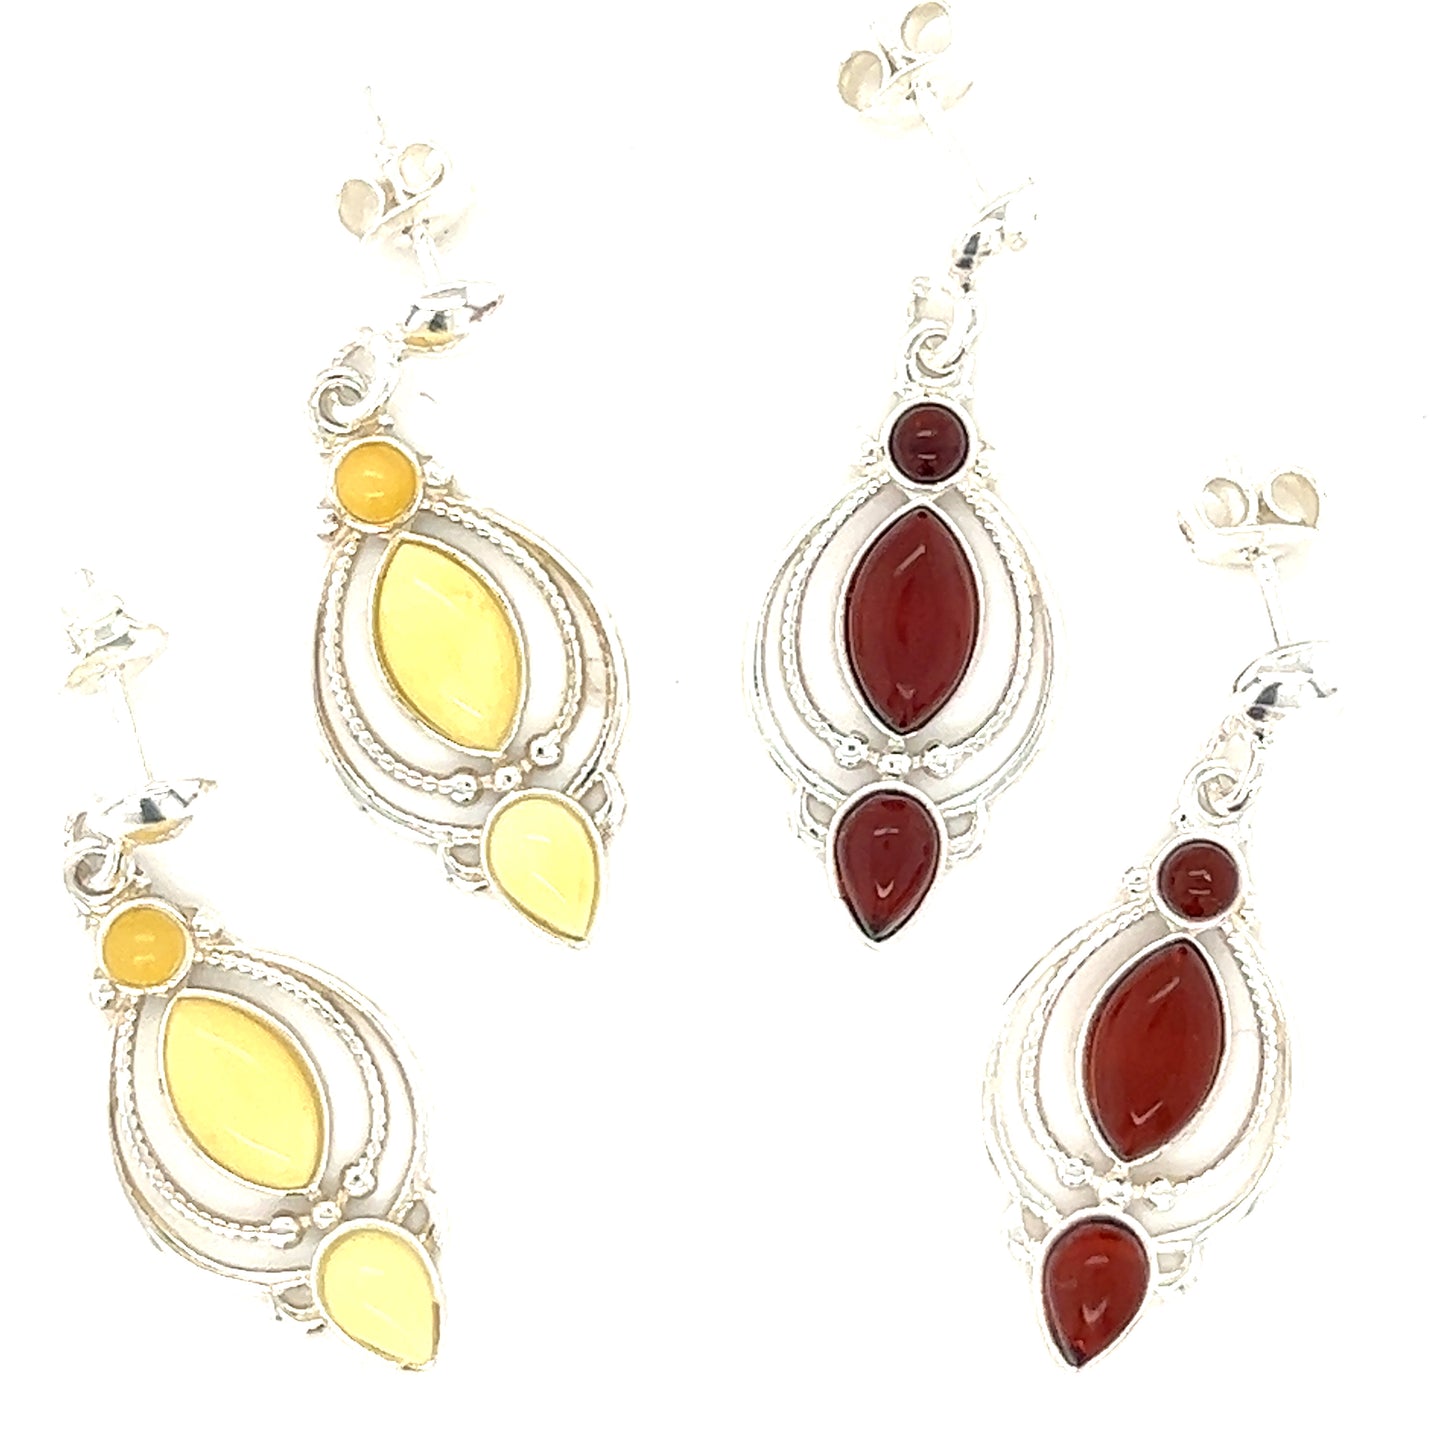 A pair of Super Silver Fancy Marquise Shaped Baltic Amber Earrings with red and yellow stones, featuring Baltic amber accents.